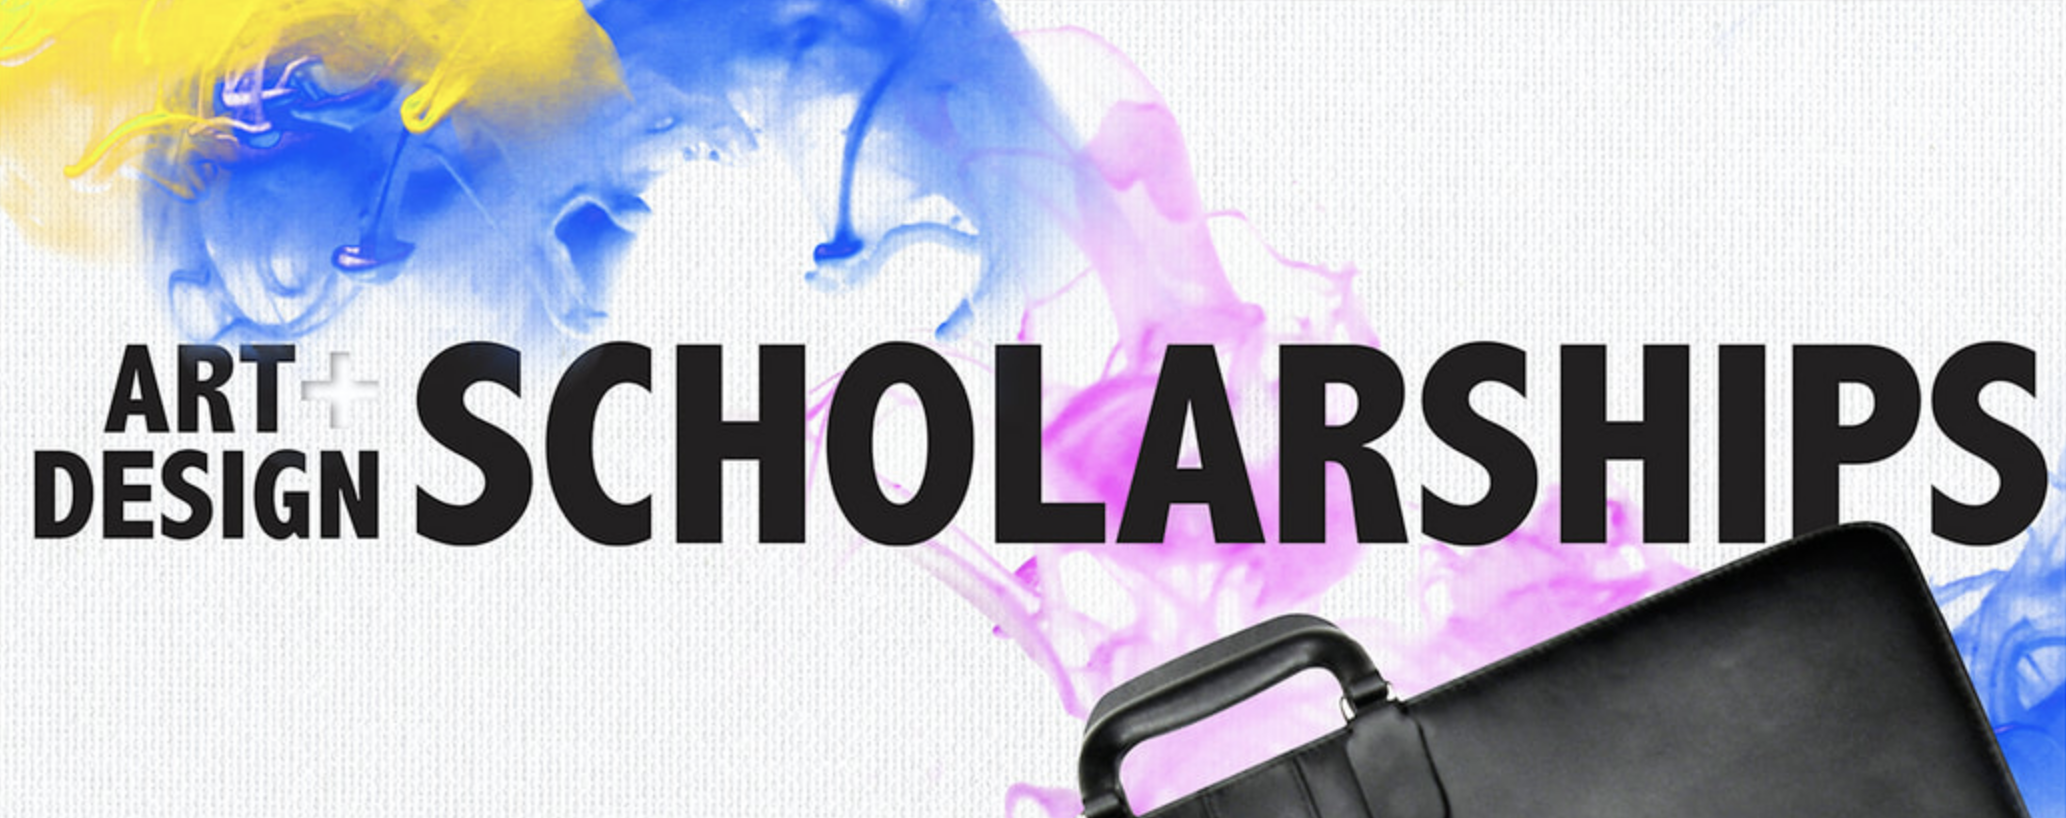 Art Scholarships for Students 2021 Latest Application Portal Update